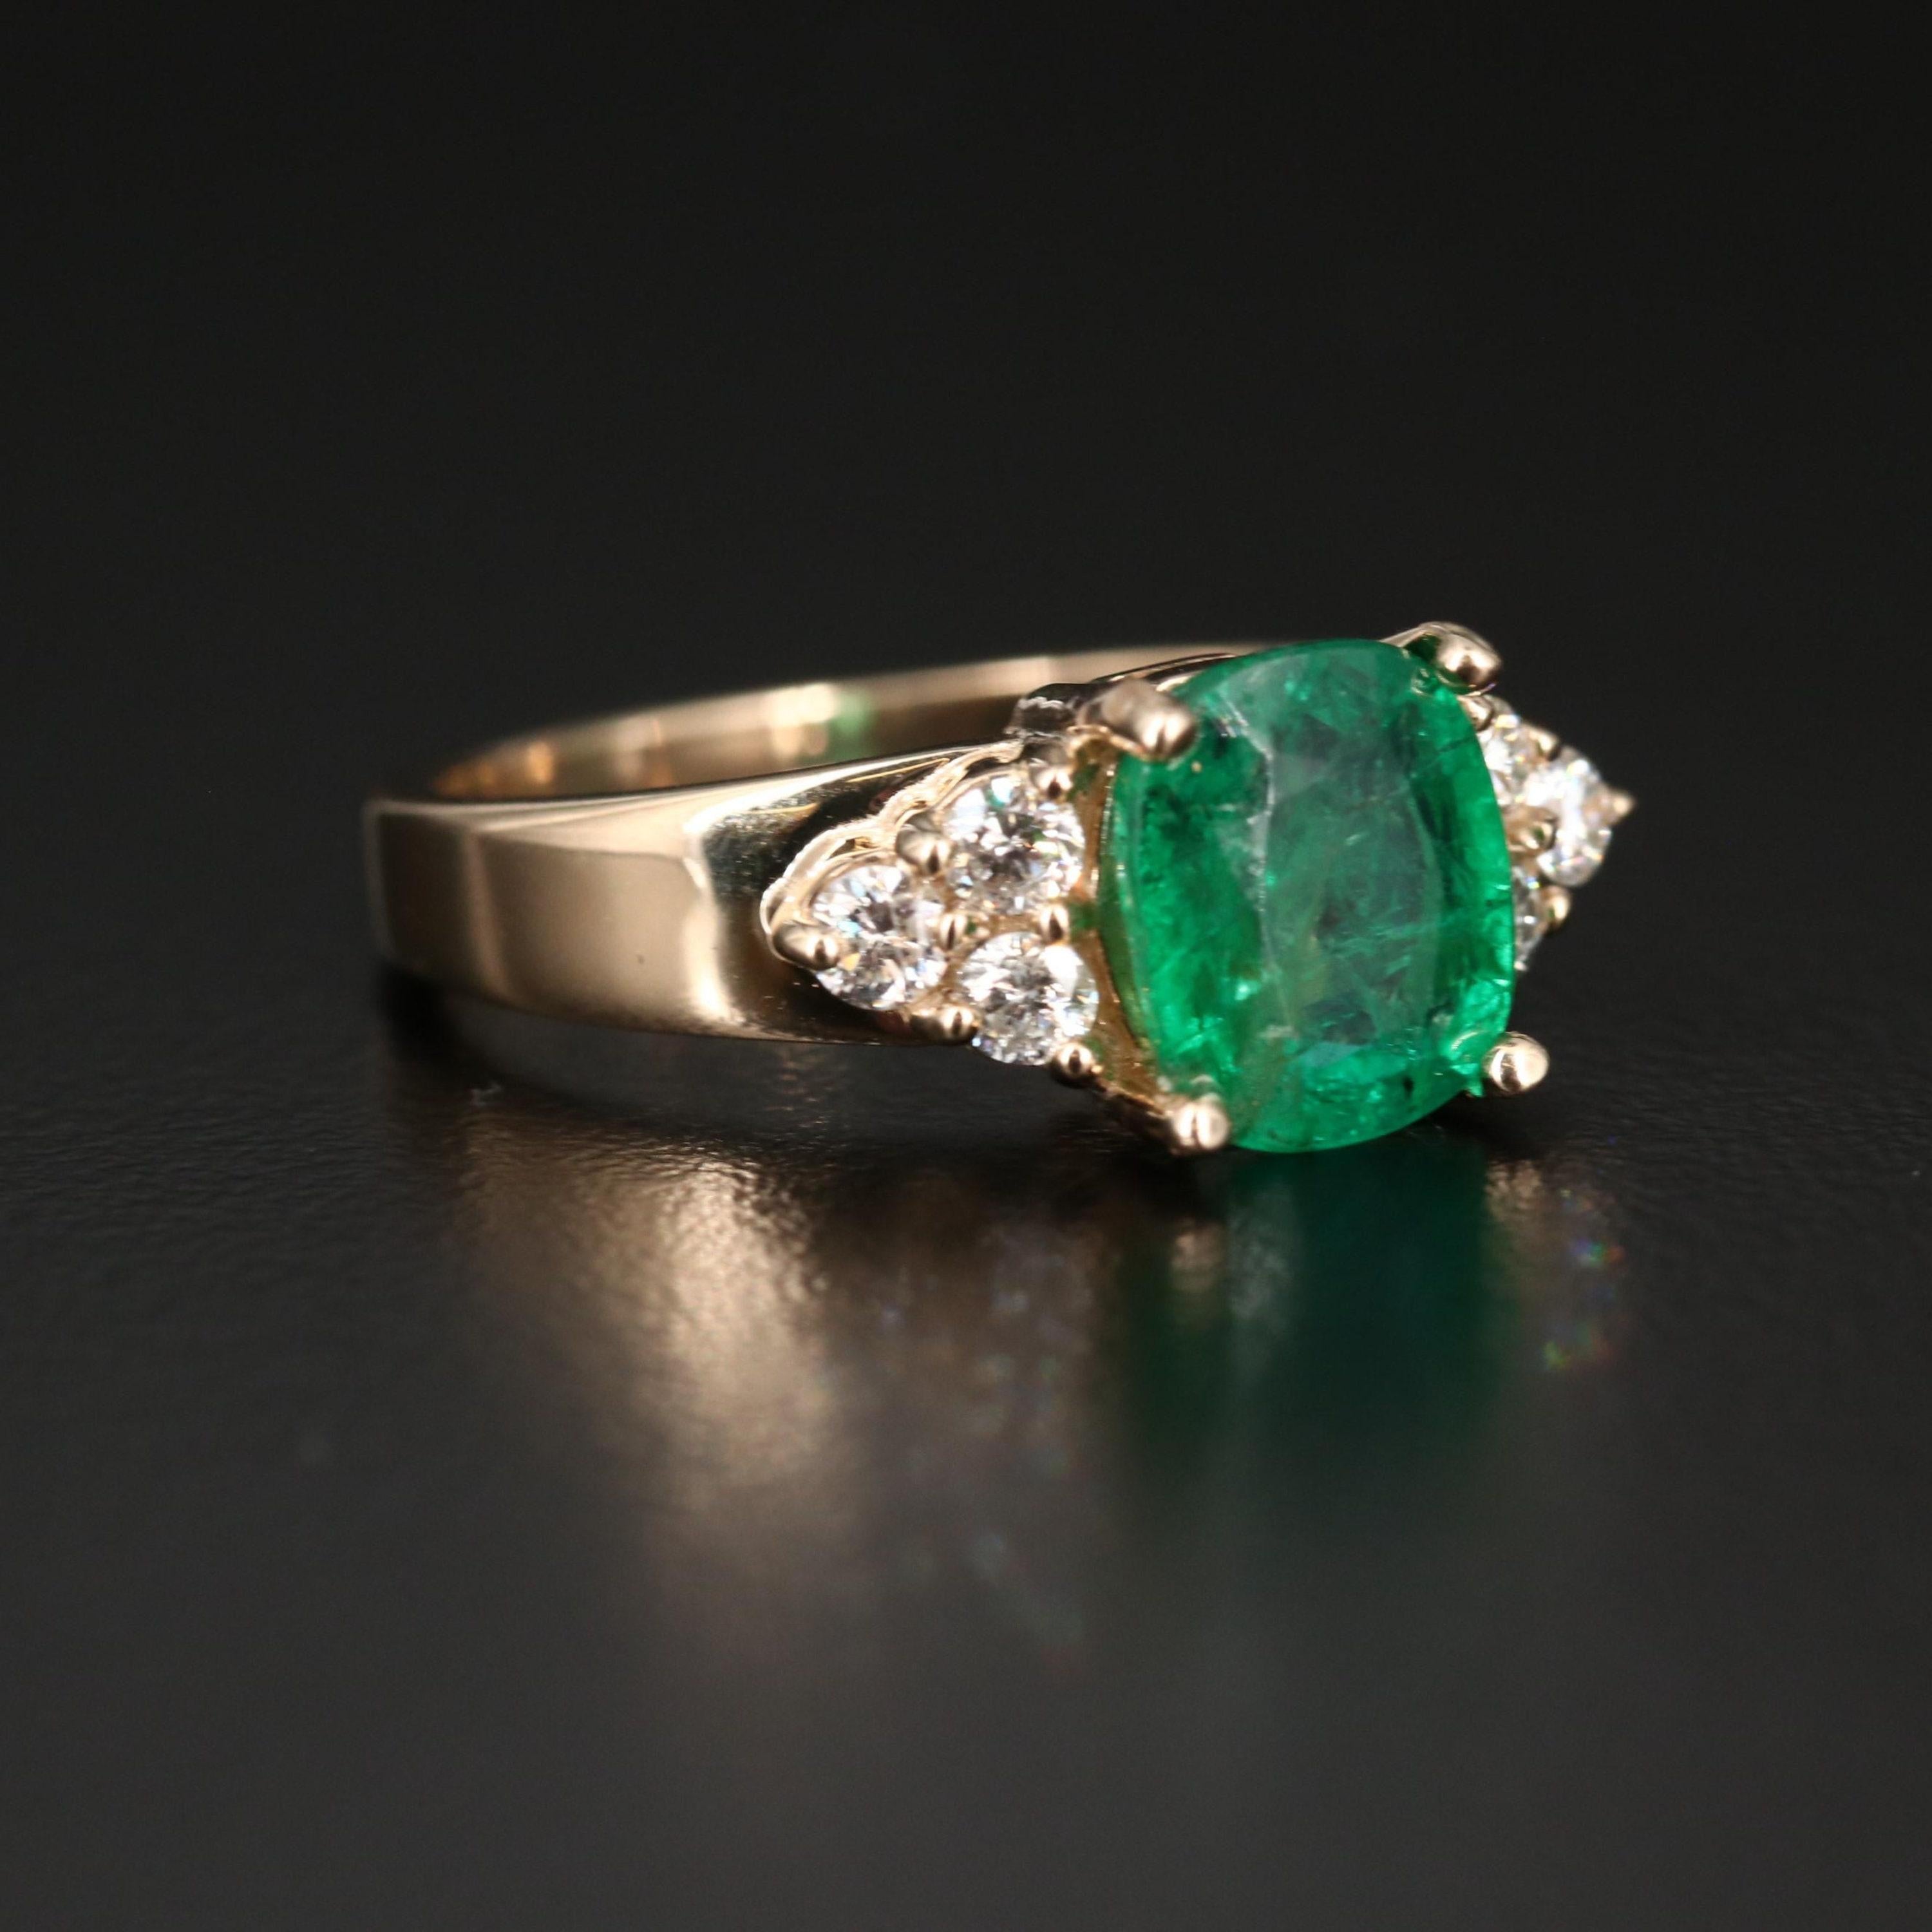 For Sale:  Minimalist Cushion Cut Natural Emerald Diamond Engagement Ring, Promise Ring 5